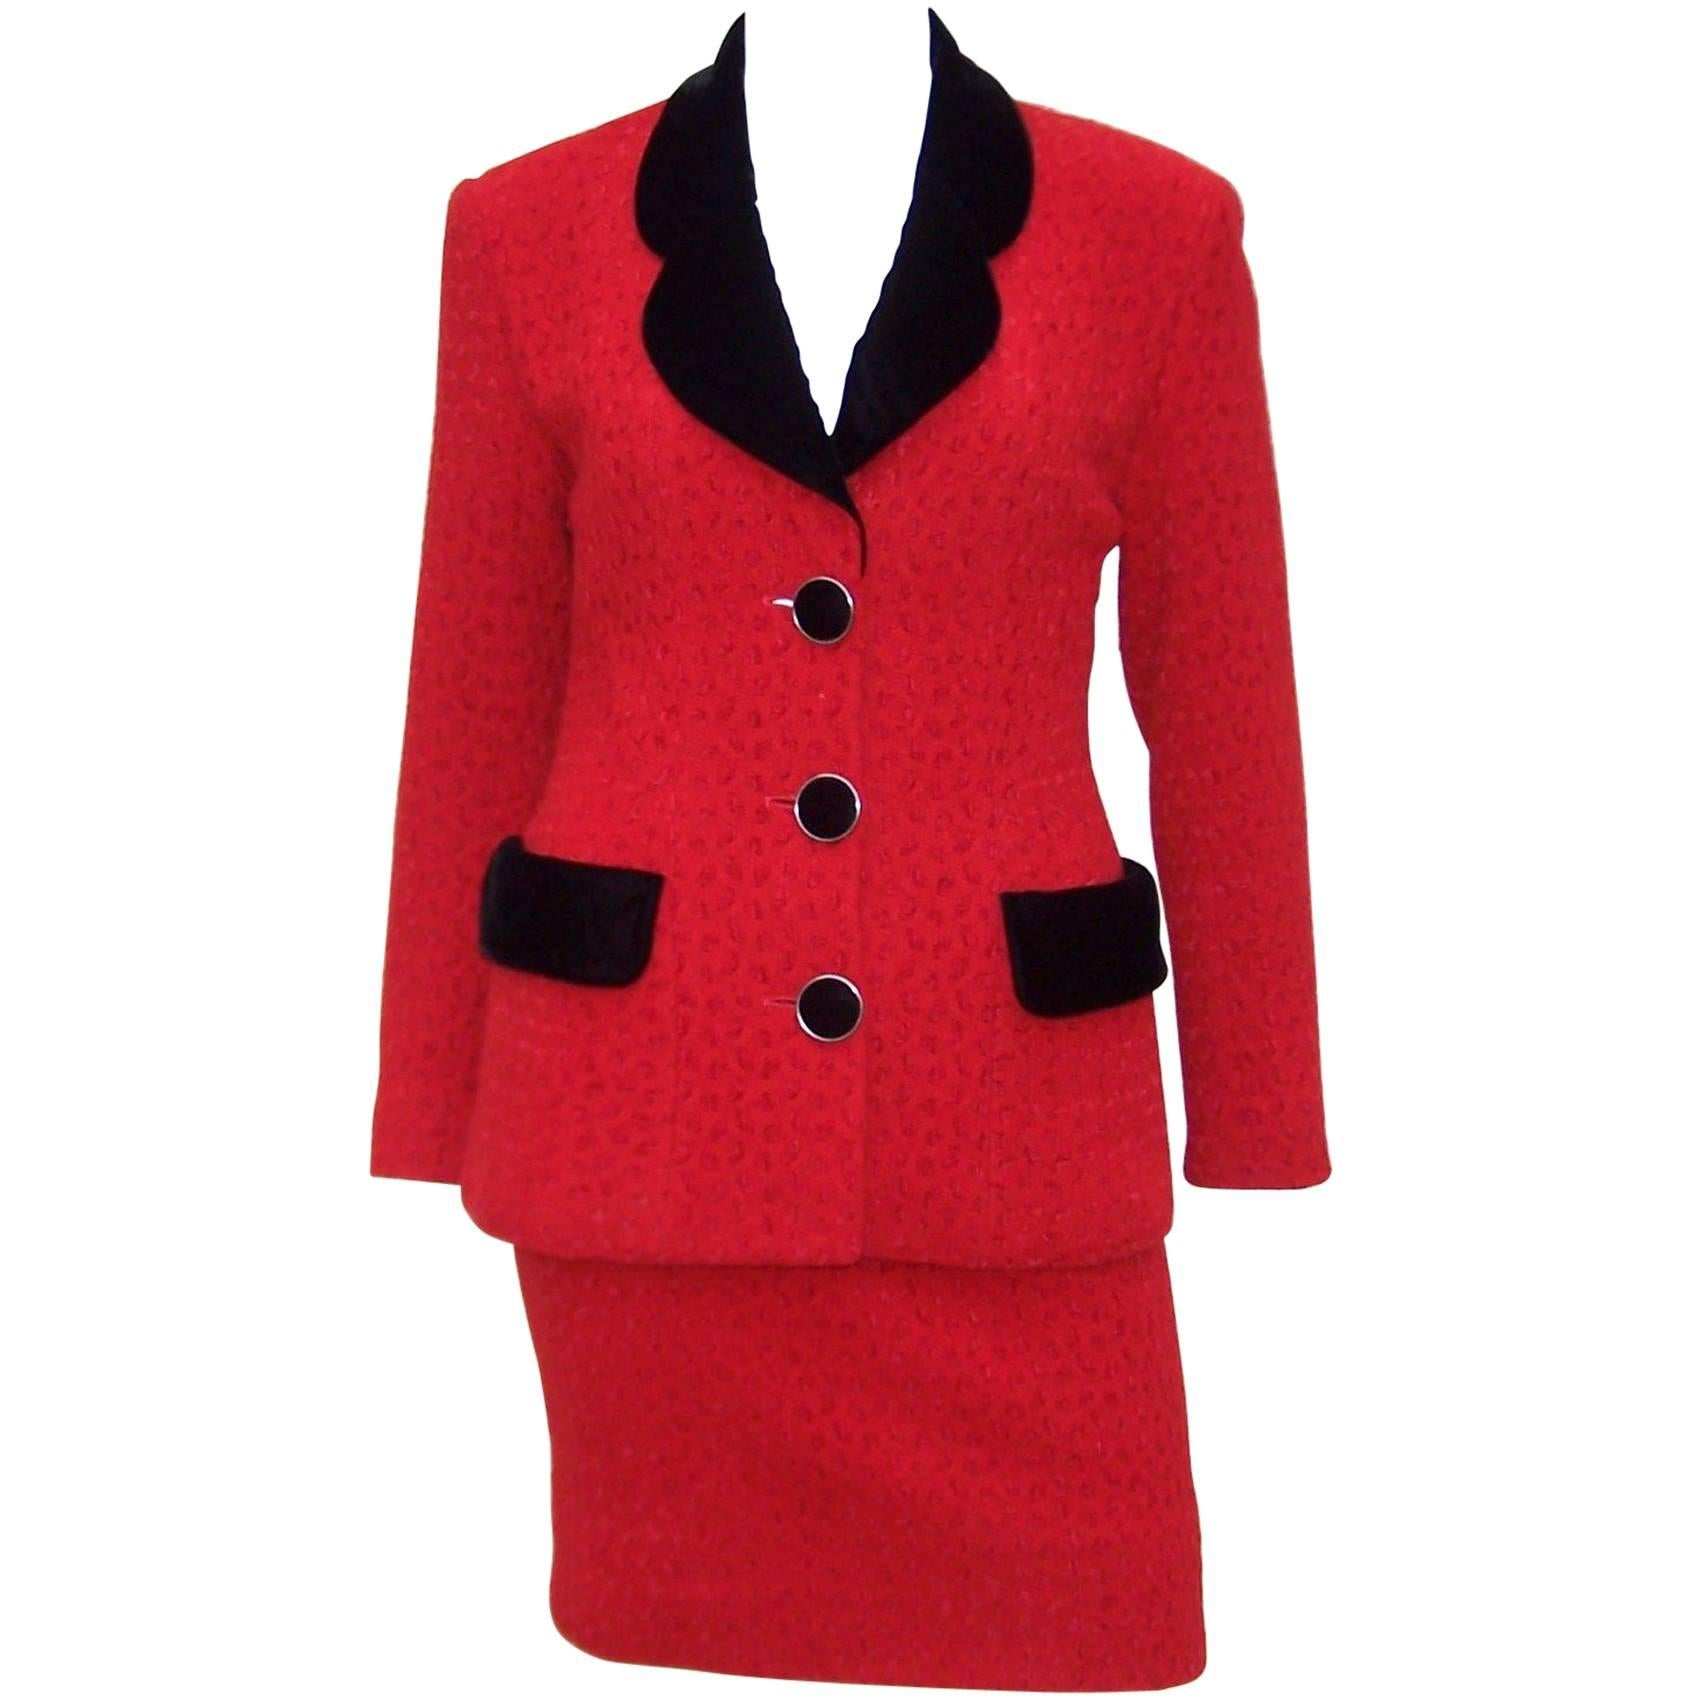 Classy C.1990 Karl Lagerfeld Red Wool Suit With Black Velvet Accents